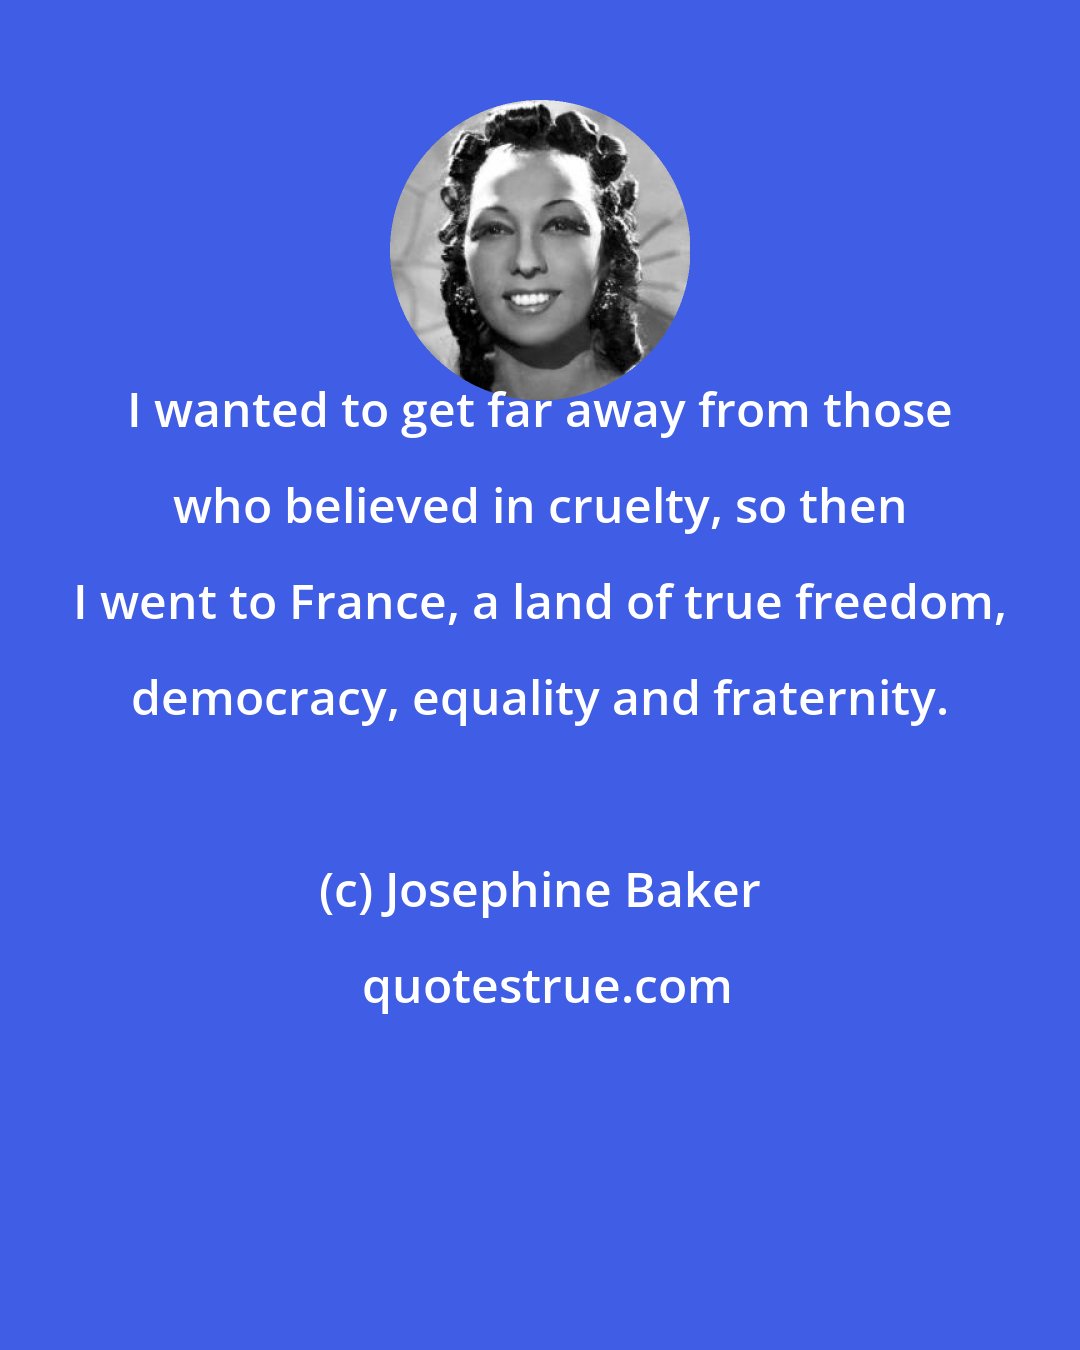 Josephine Baker: I wanted to get far away from those who believed in cruelty, so then I went to France, a land of true freedom, democracy, equality and fraternity.